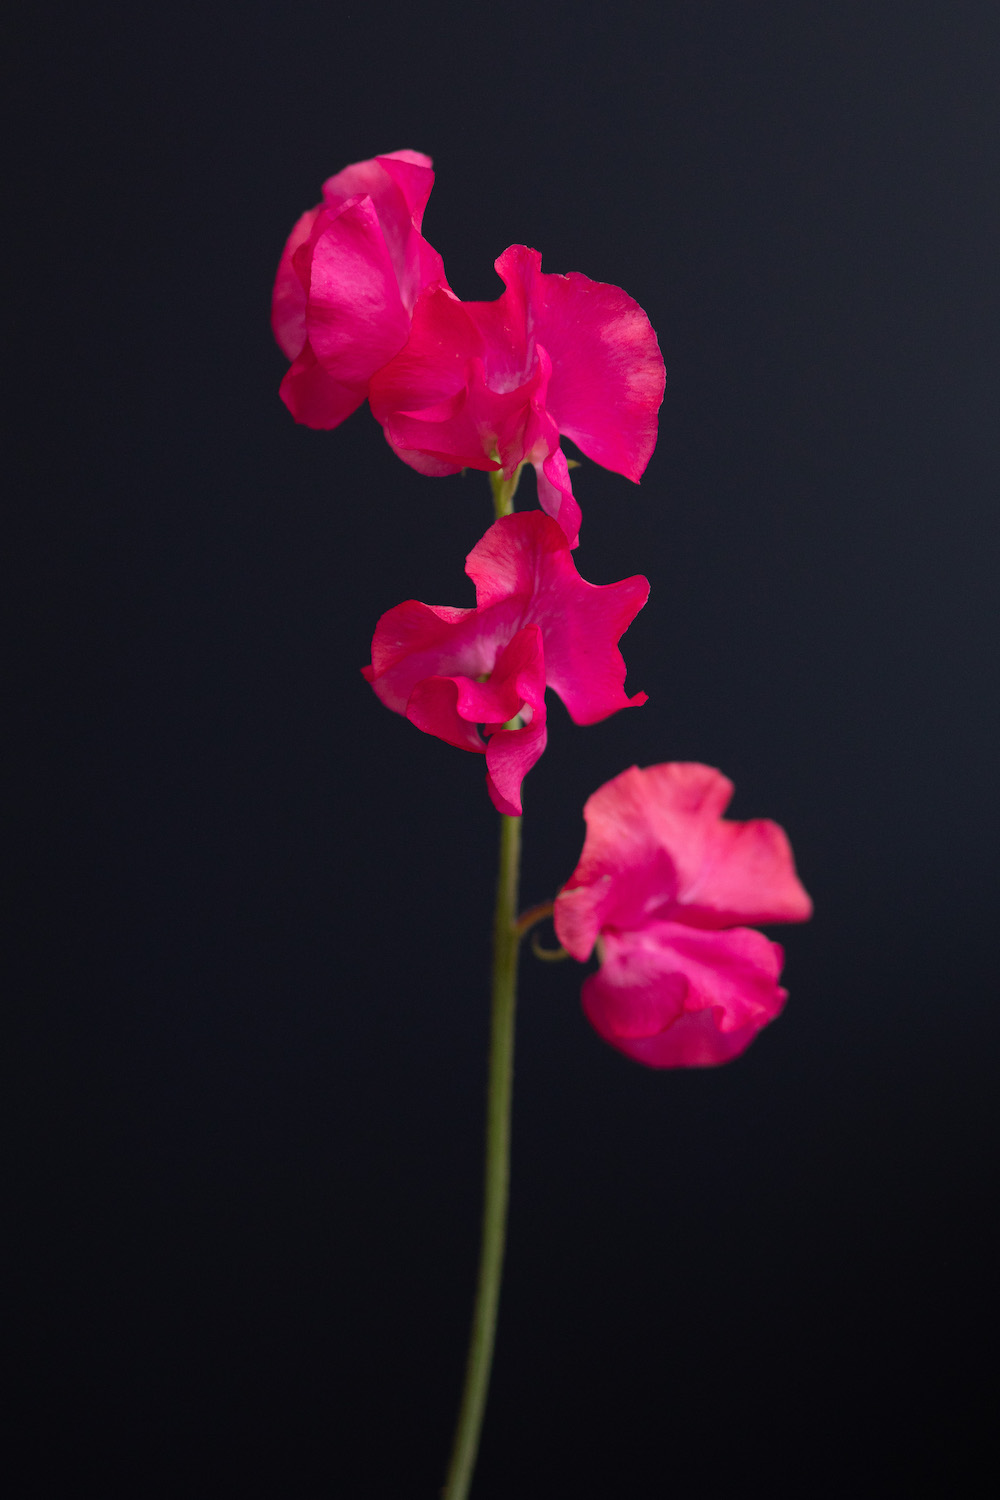 A Floral Shoot With Colorful Lathyrus003